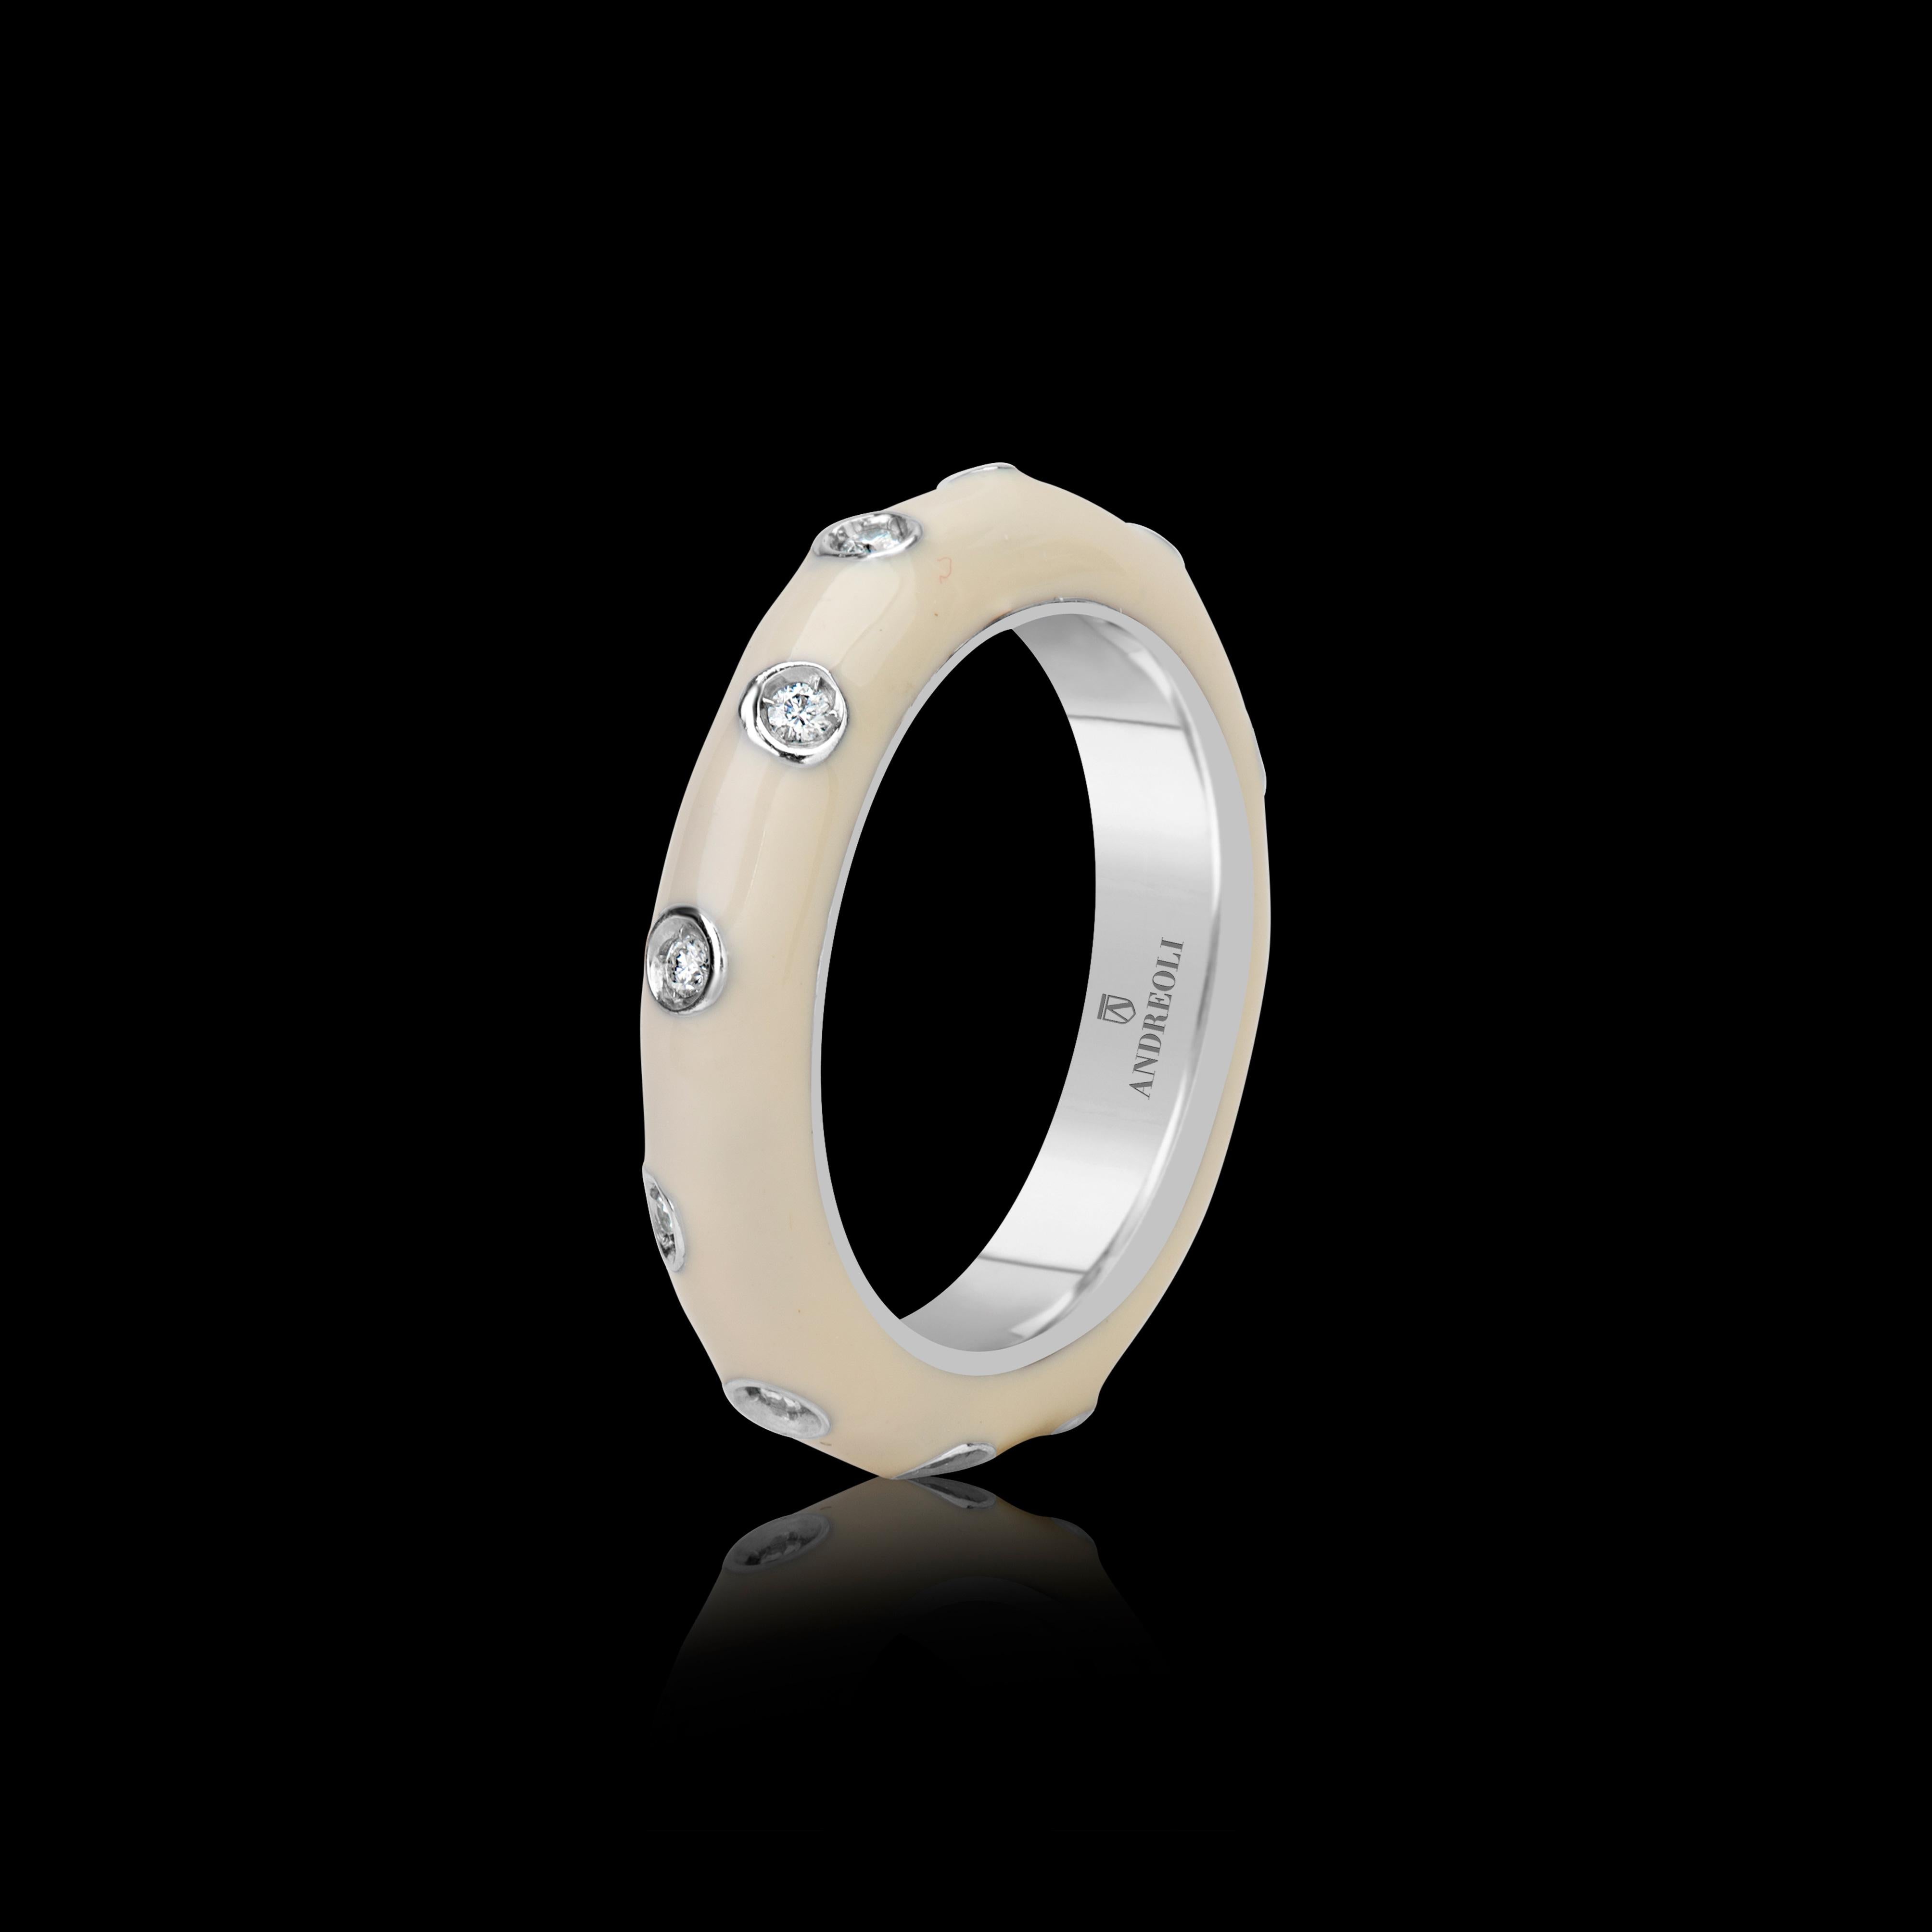 Andreoli White Enamel Diamond Band Ring 18 Karat White Gold In New Condition For Sale In New York, NY